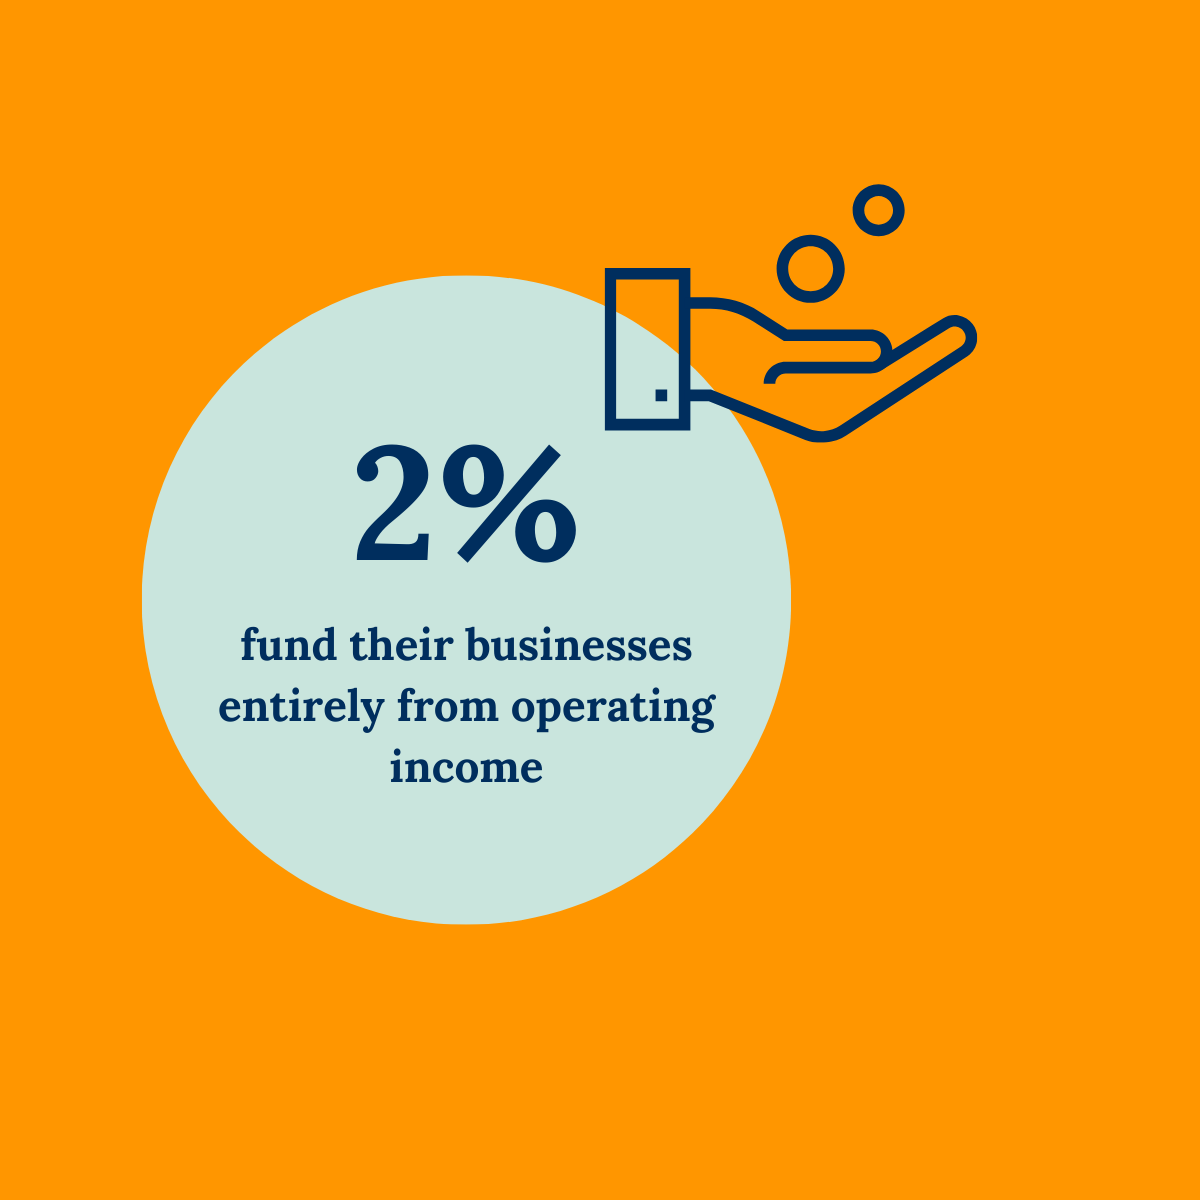 2% fund their businesses entirely from operating income